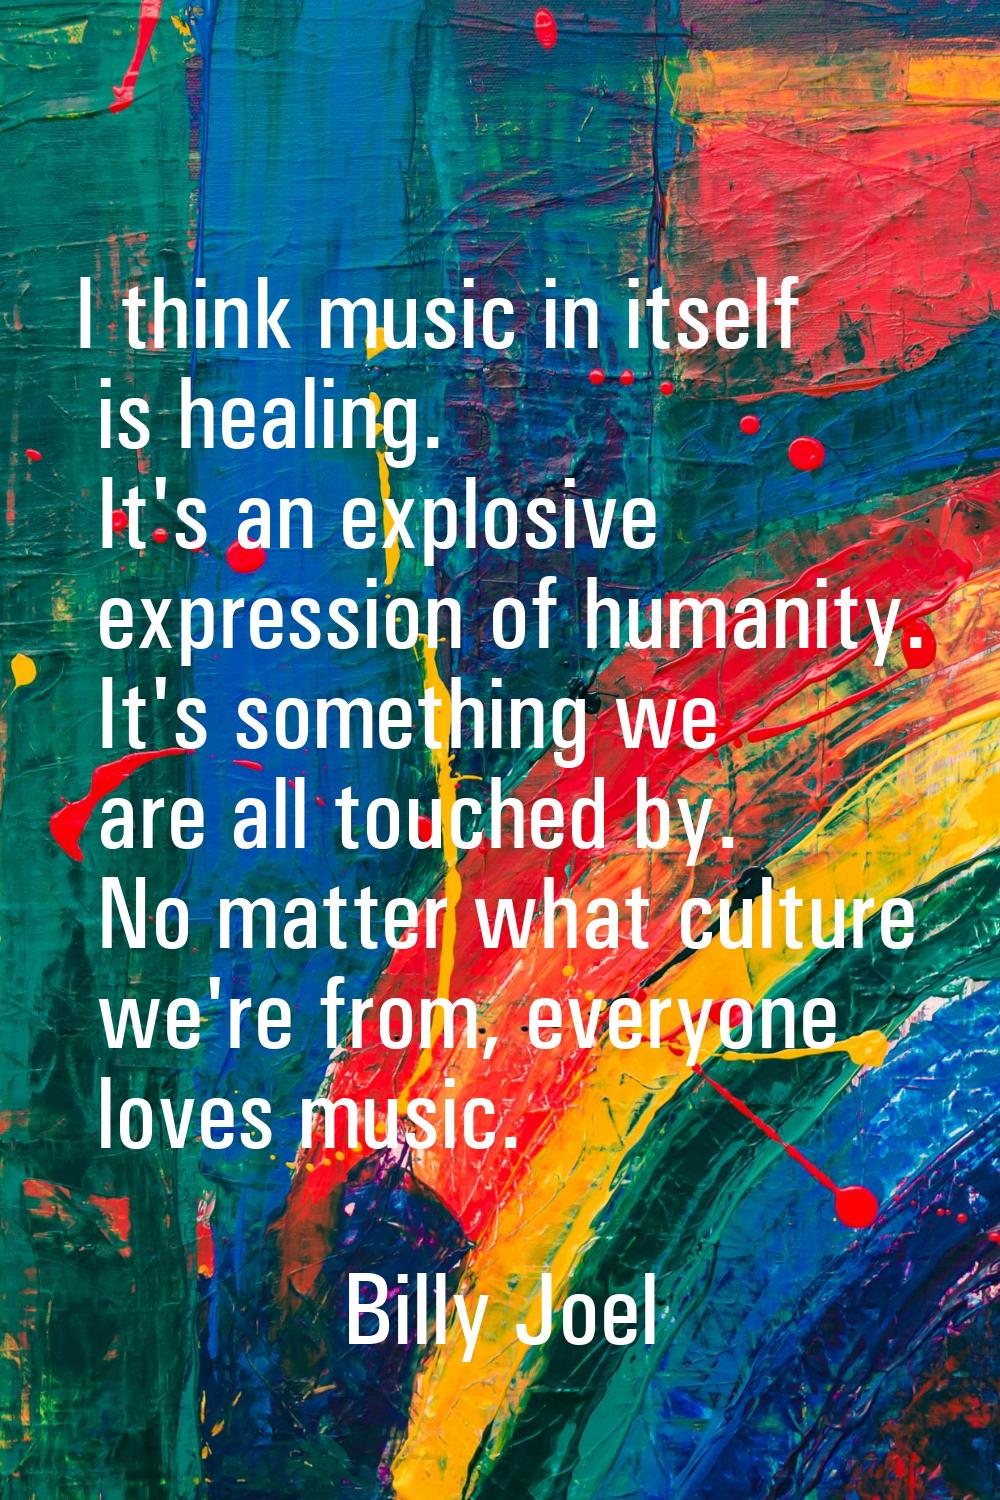 I think music in itself is healing. It's an explosive expression of humanity. It's something we are